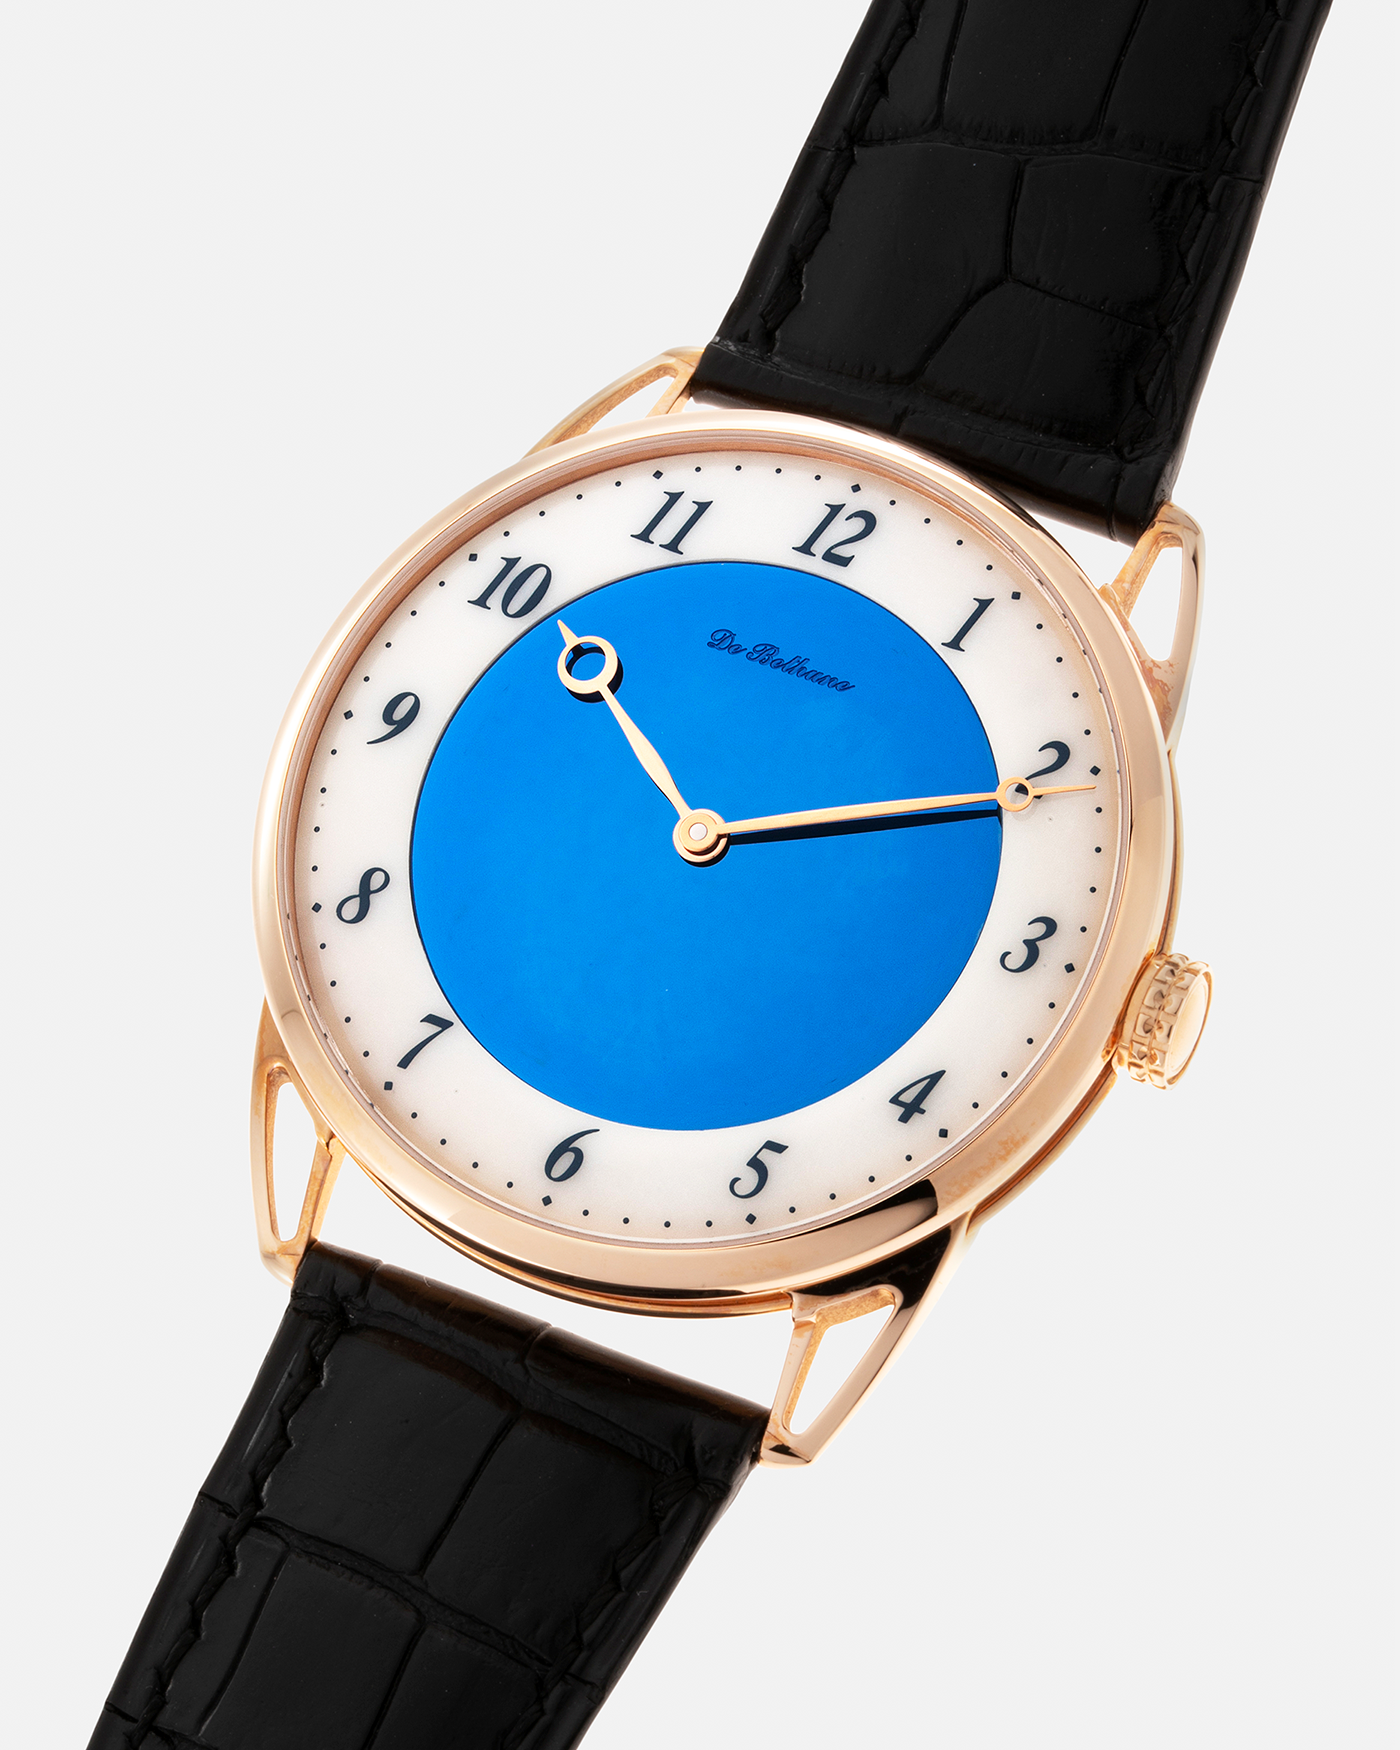 Brand: De Bethune Year: Circa 2020 Model: Midnight Blue Reference: DB25XPARV2 Material: 18-carat Rose Gold Movement: De Bethune Cal. DB2024, Self-Winding Case Diameter: 42mm Strap: De Bethune Black Alligator with Signed 18-carat Rose Gold Tang Buckle